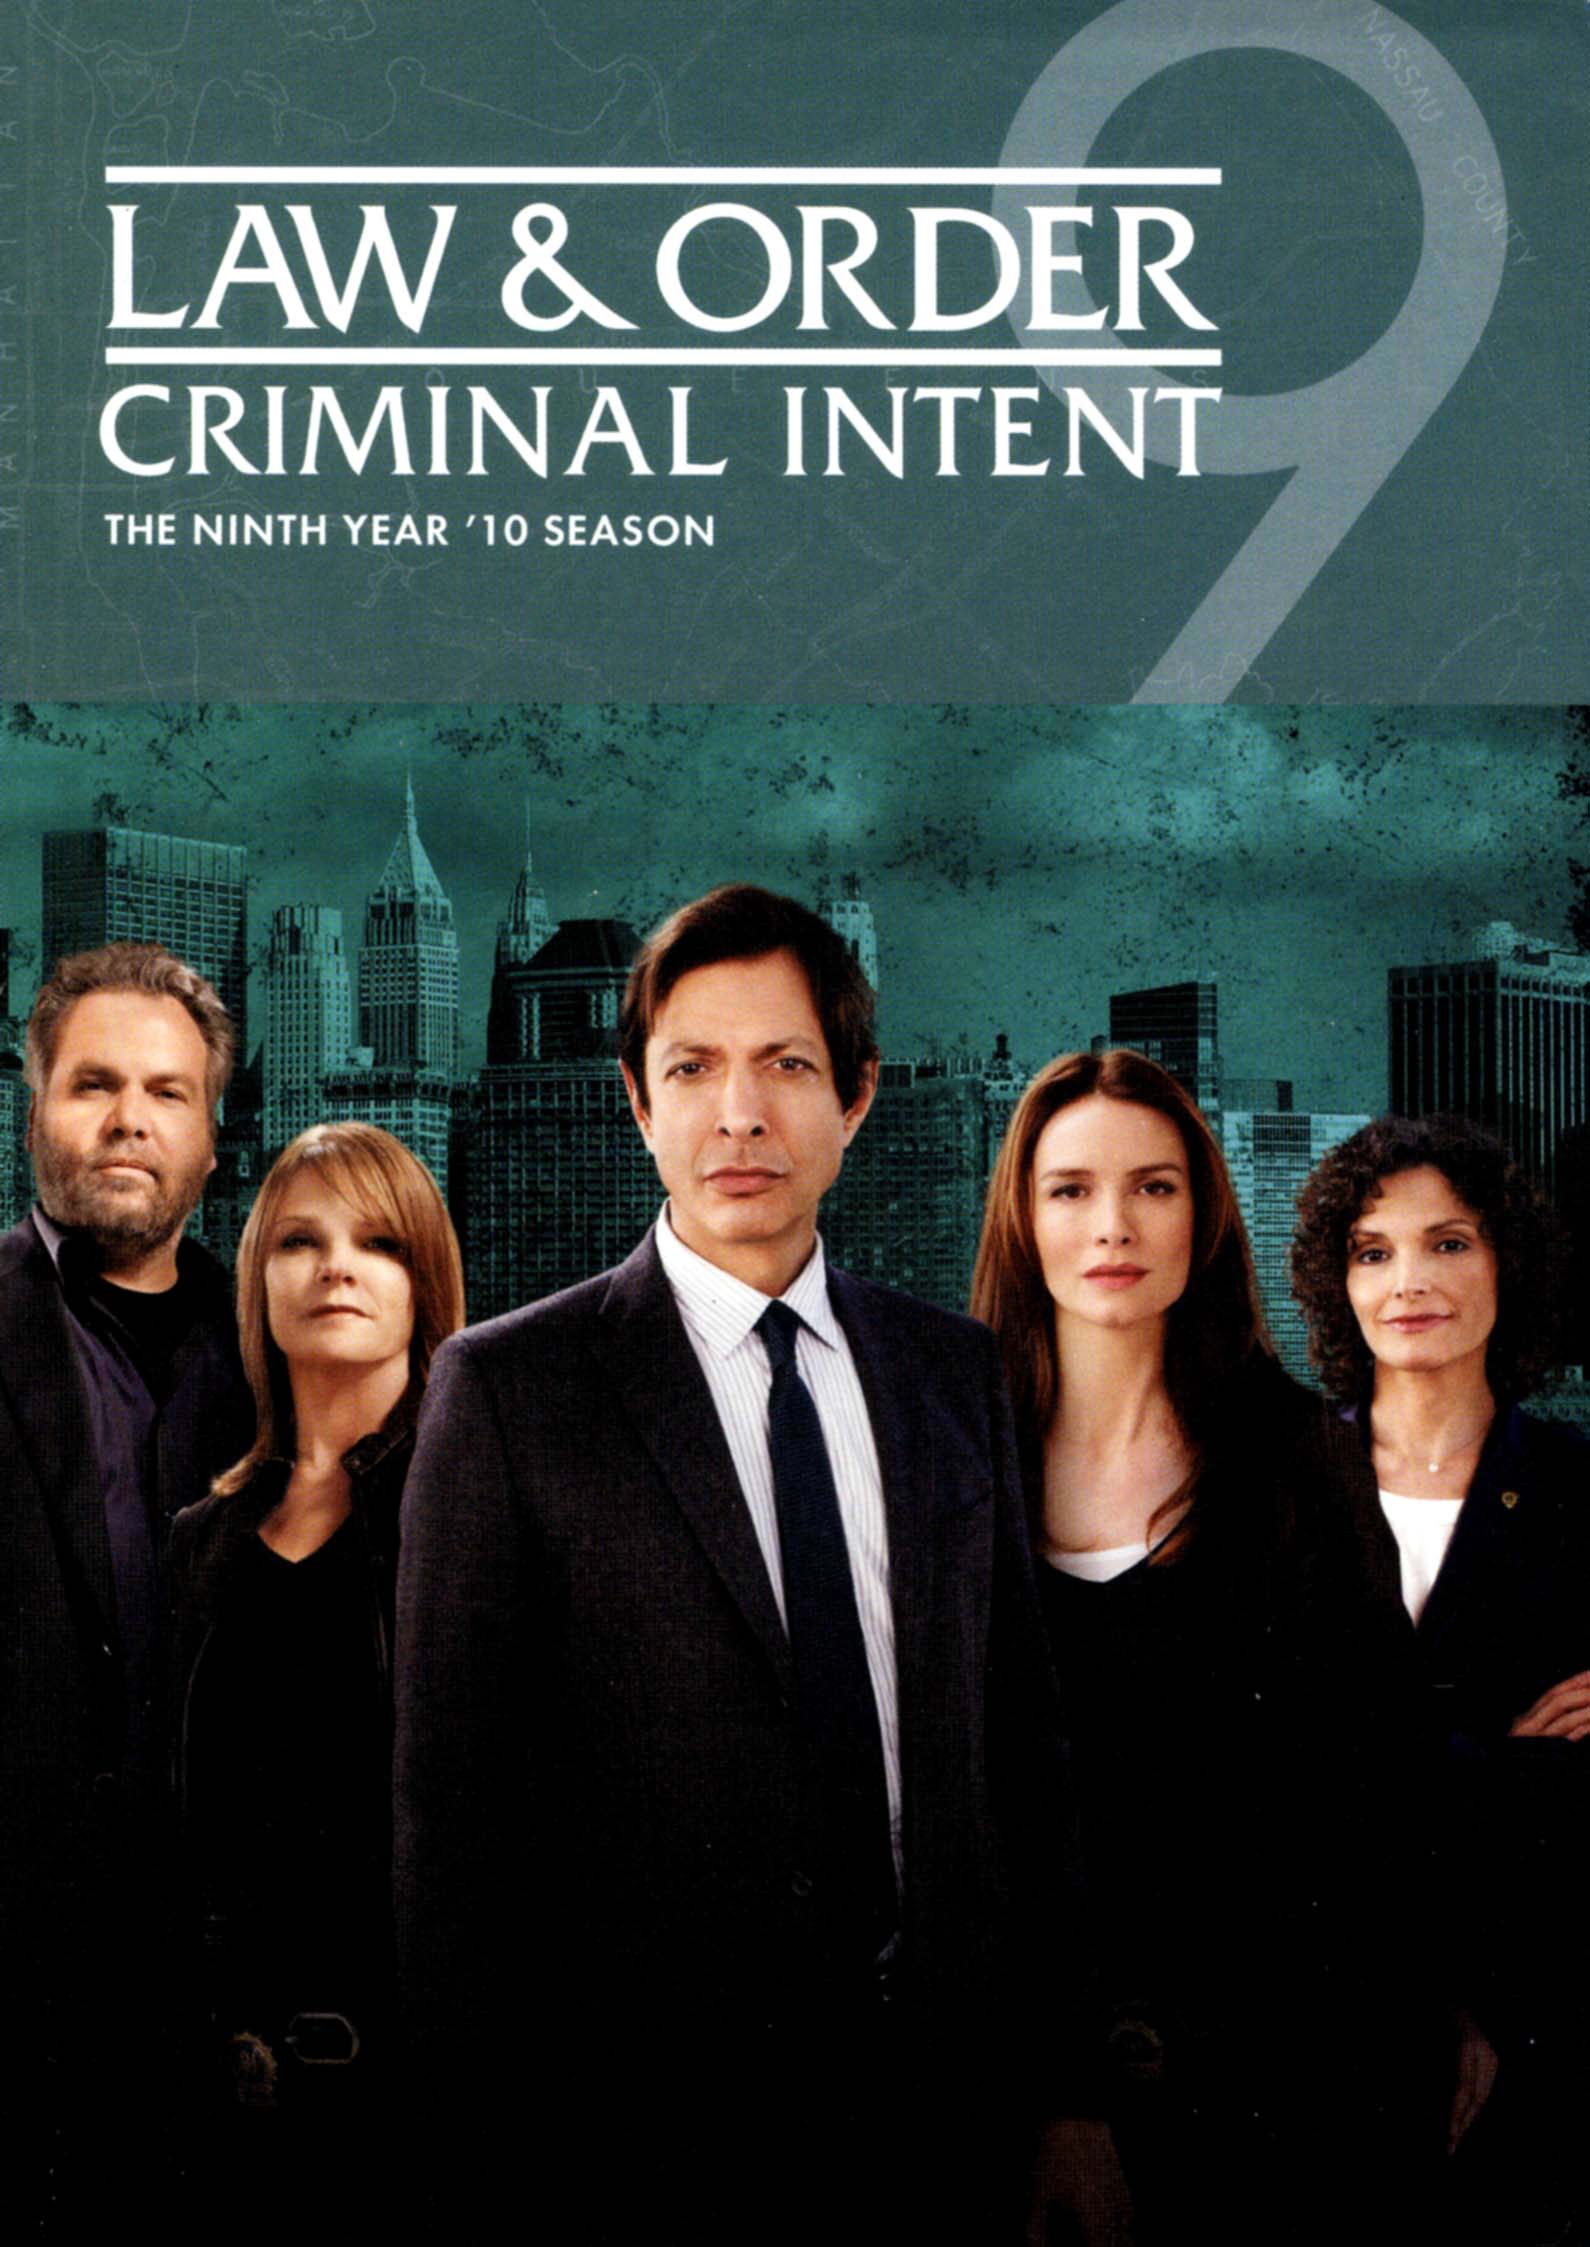 Law & Order: Criminal Intent The Ninth Year [4 Discs] - Best Buy